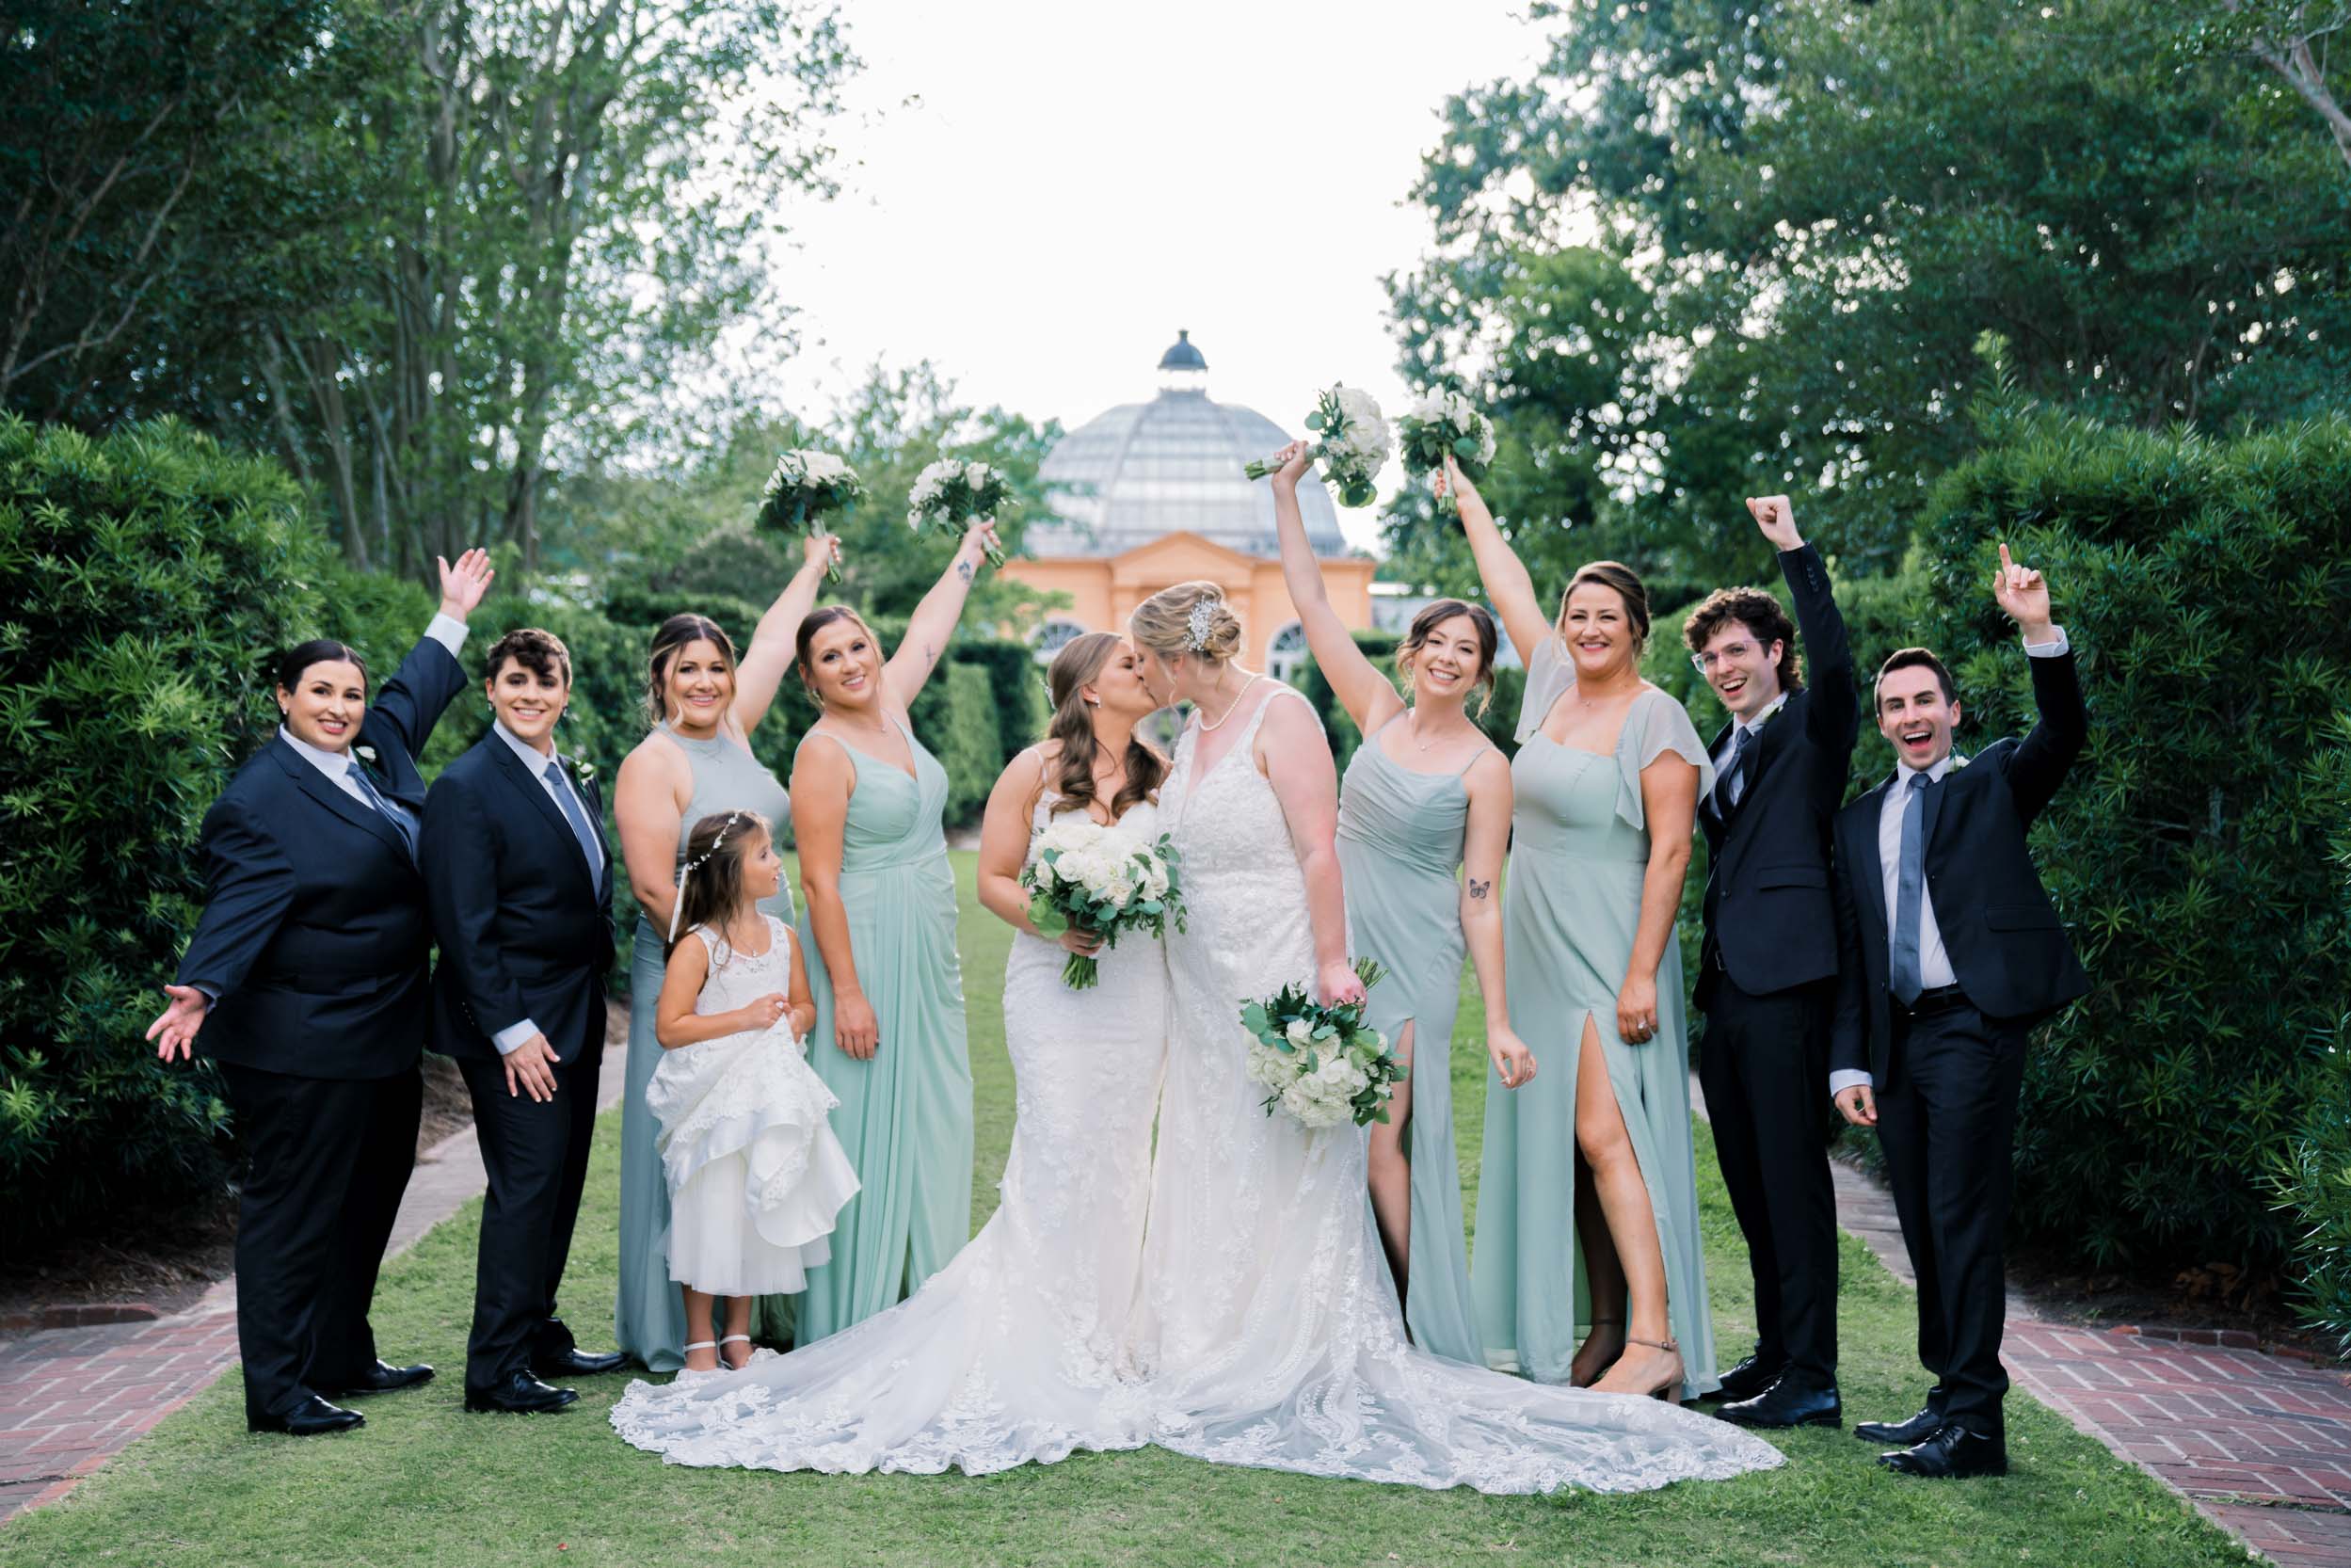 Brides and wedding party celebrating in City Park Botanical Gardens